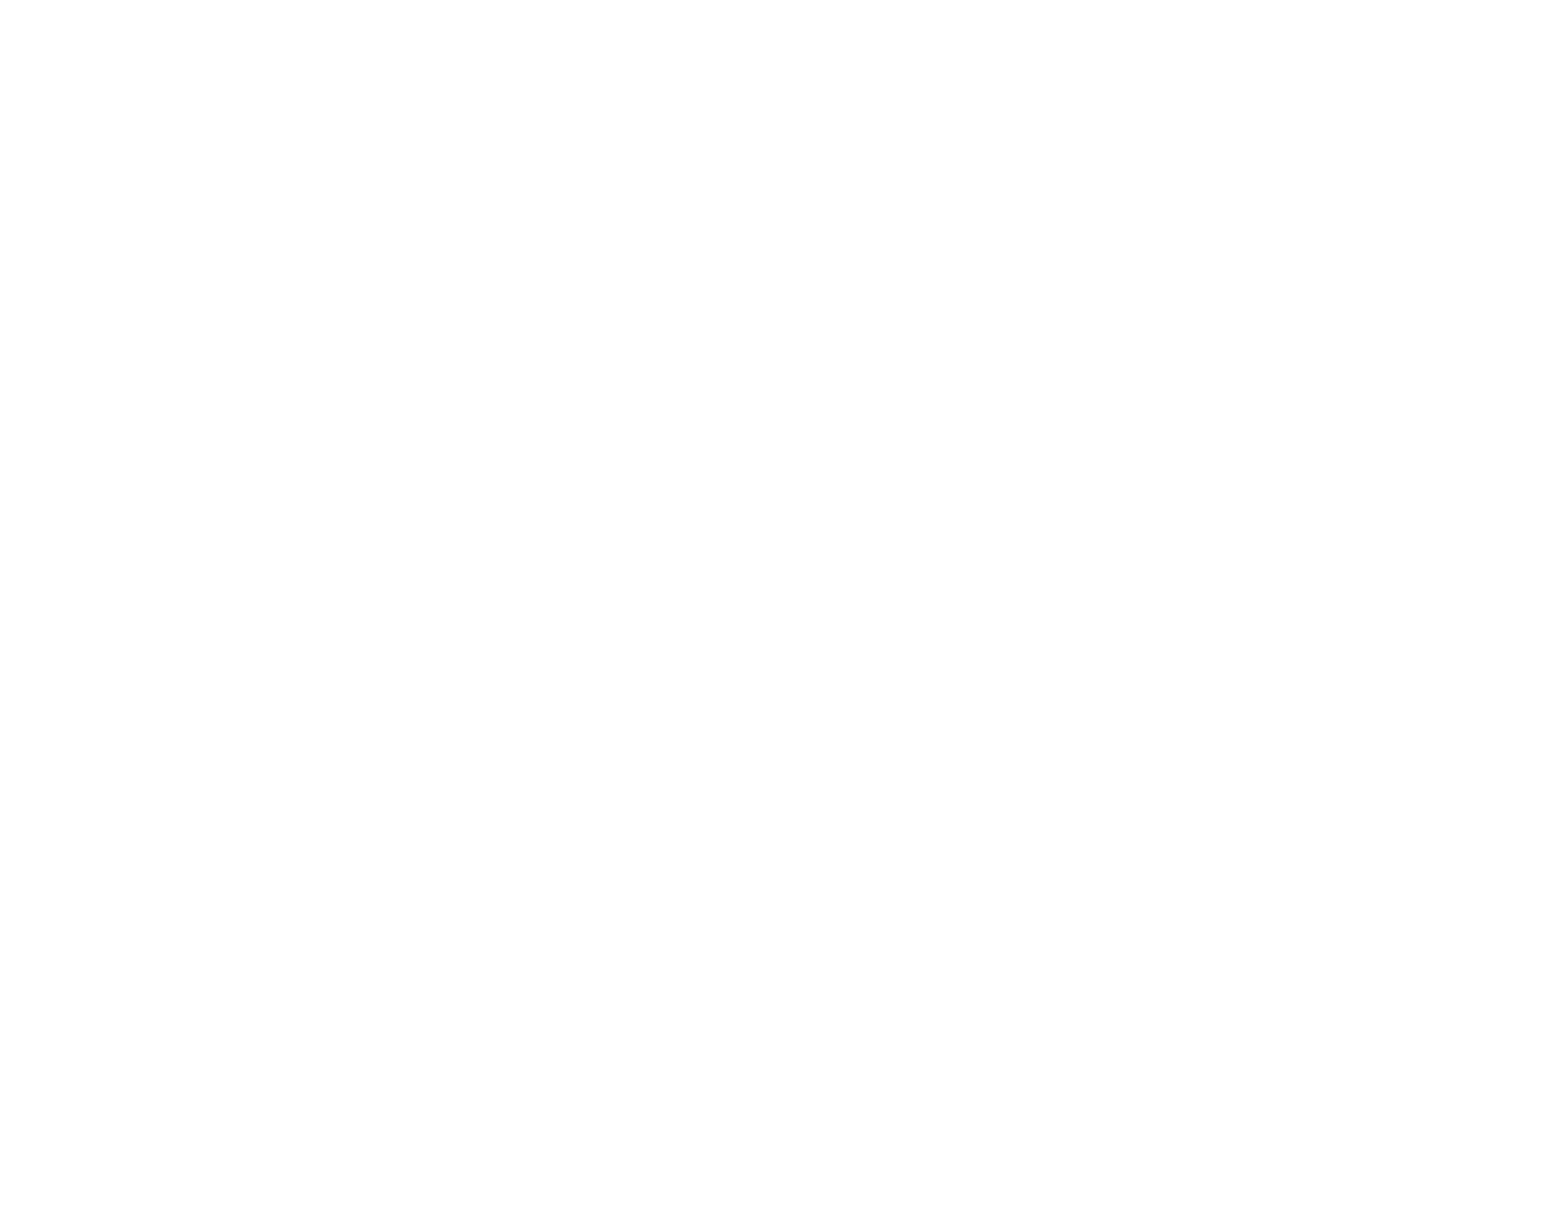 Mathematical formulae showcasing vector norms on a black background with specific components and results in white text